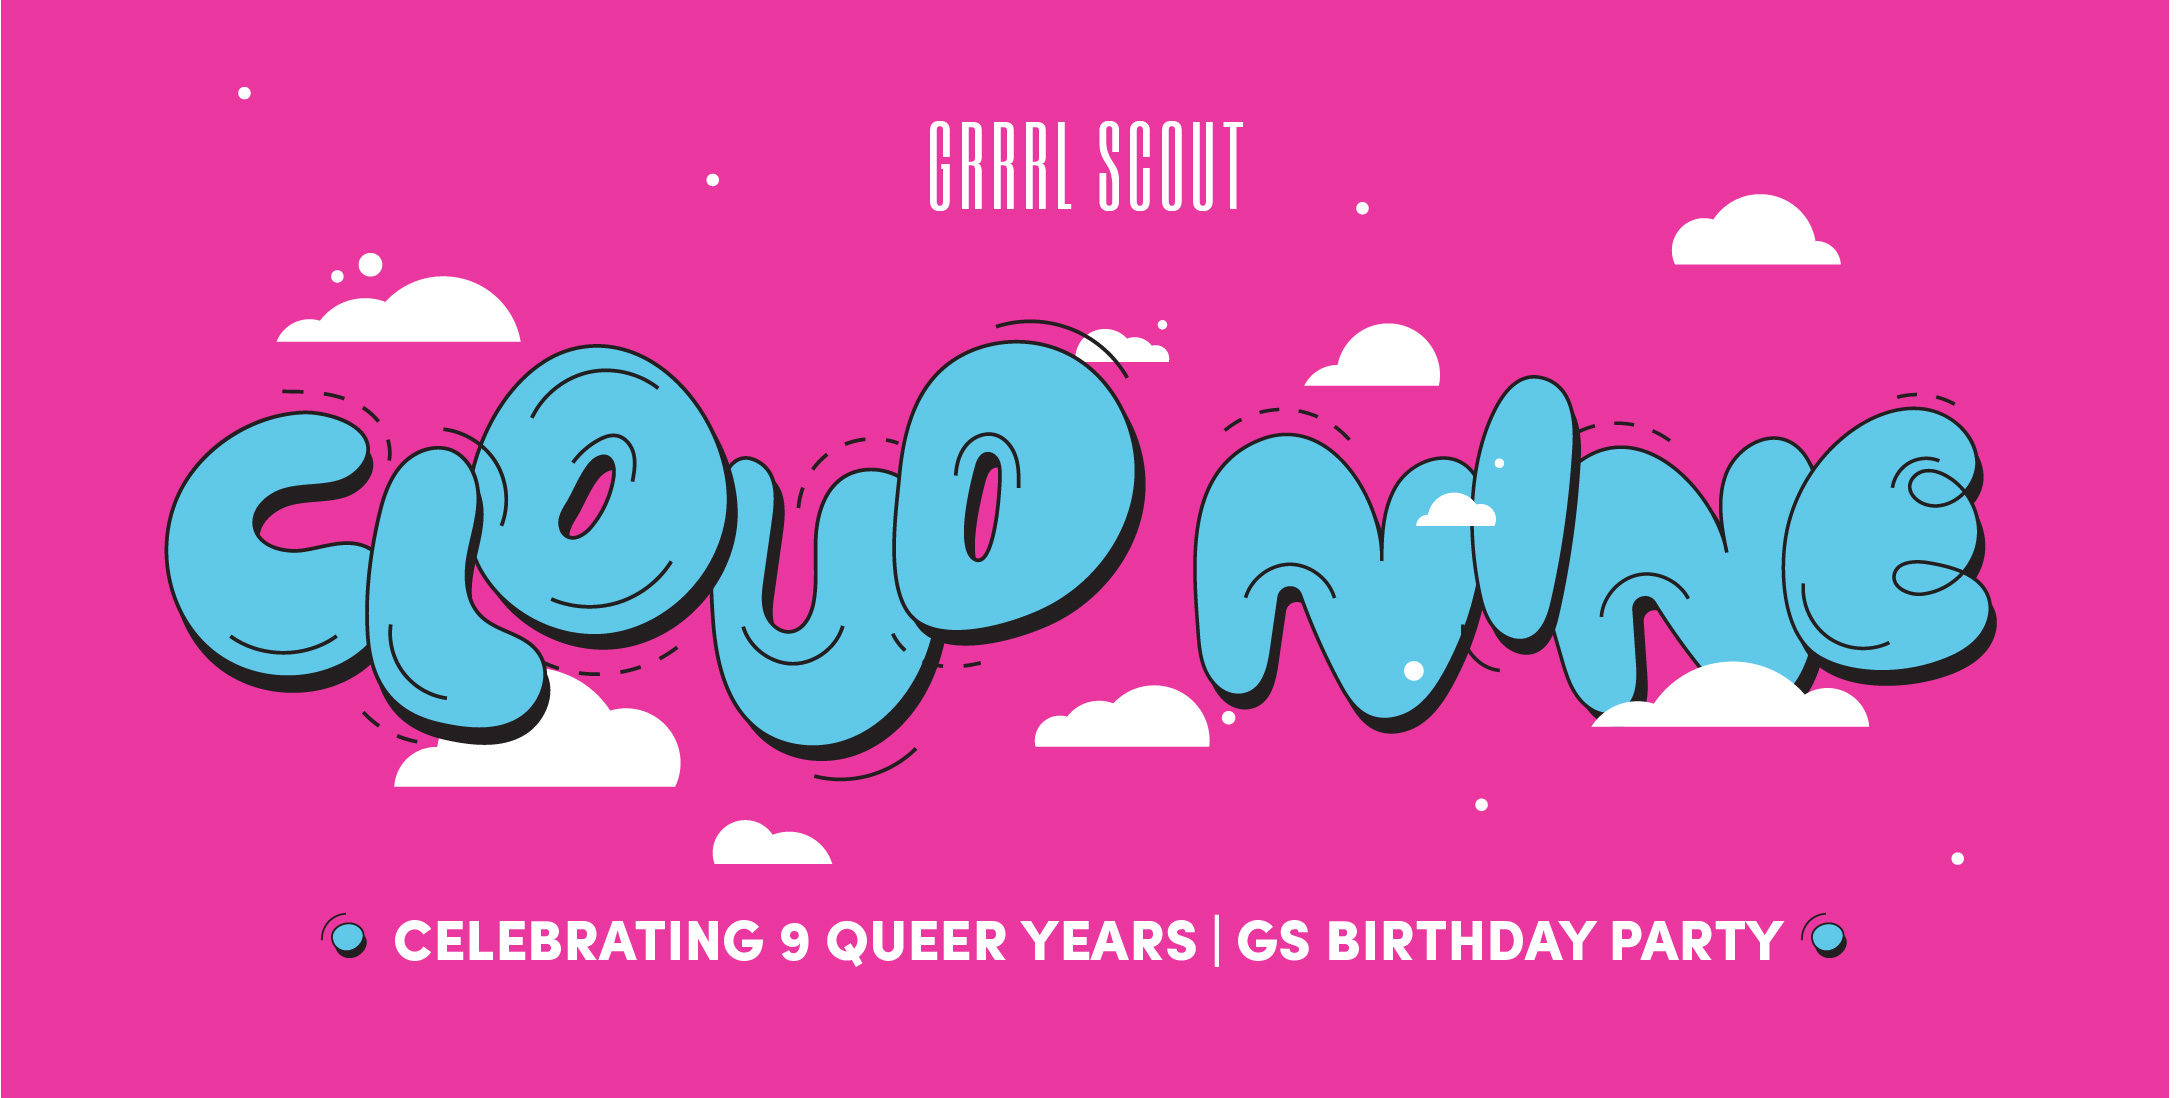 GRRRL SCOUT: August Queer Dance Party - The Hook and Ladder